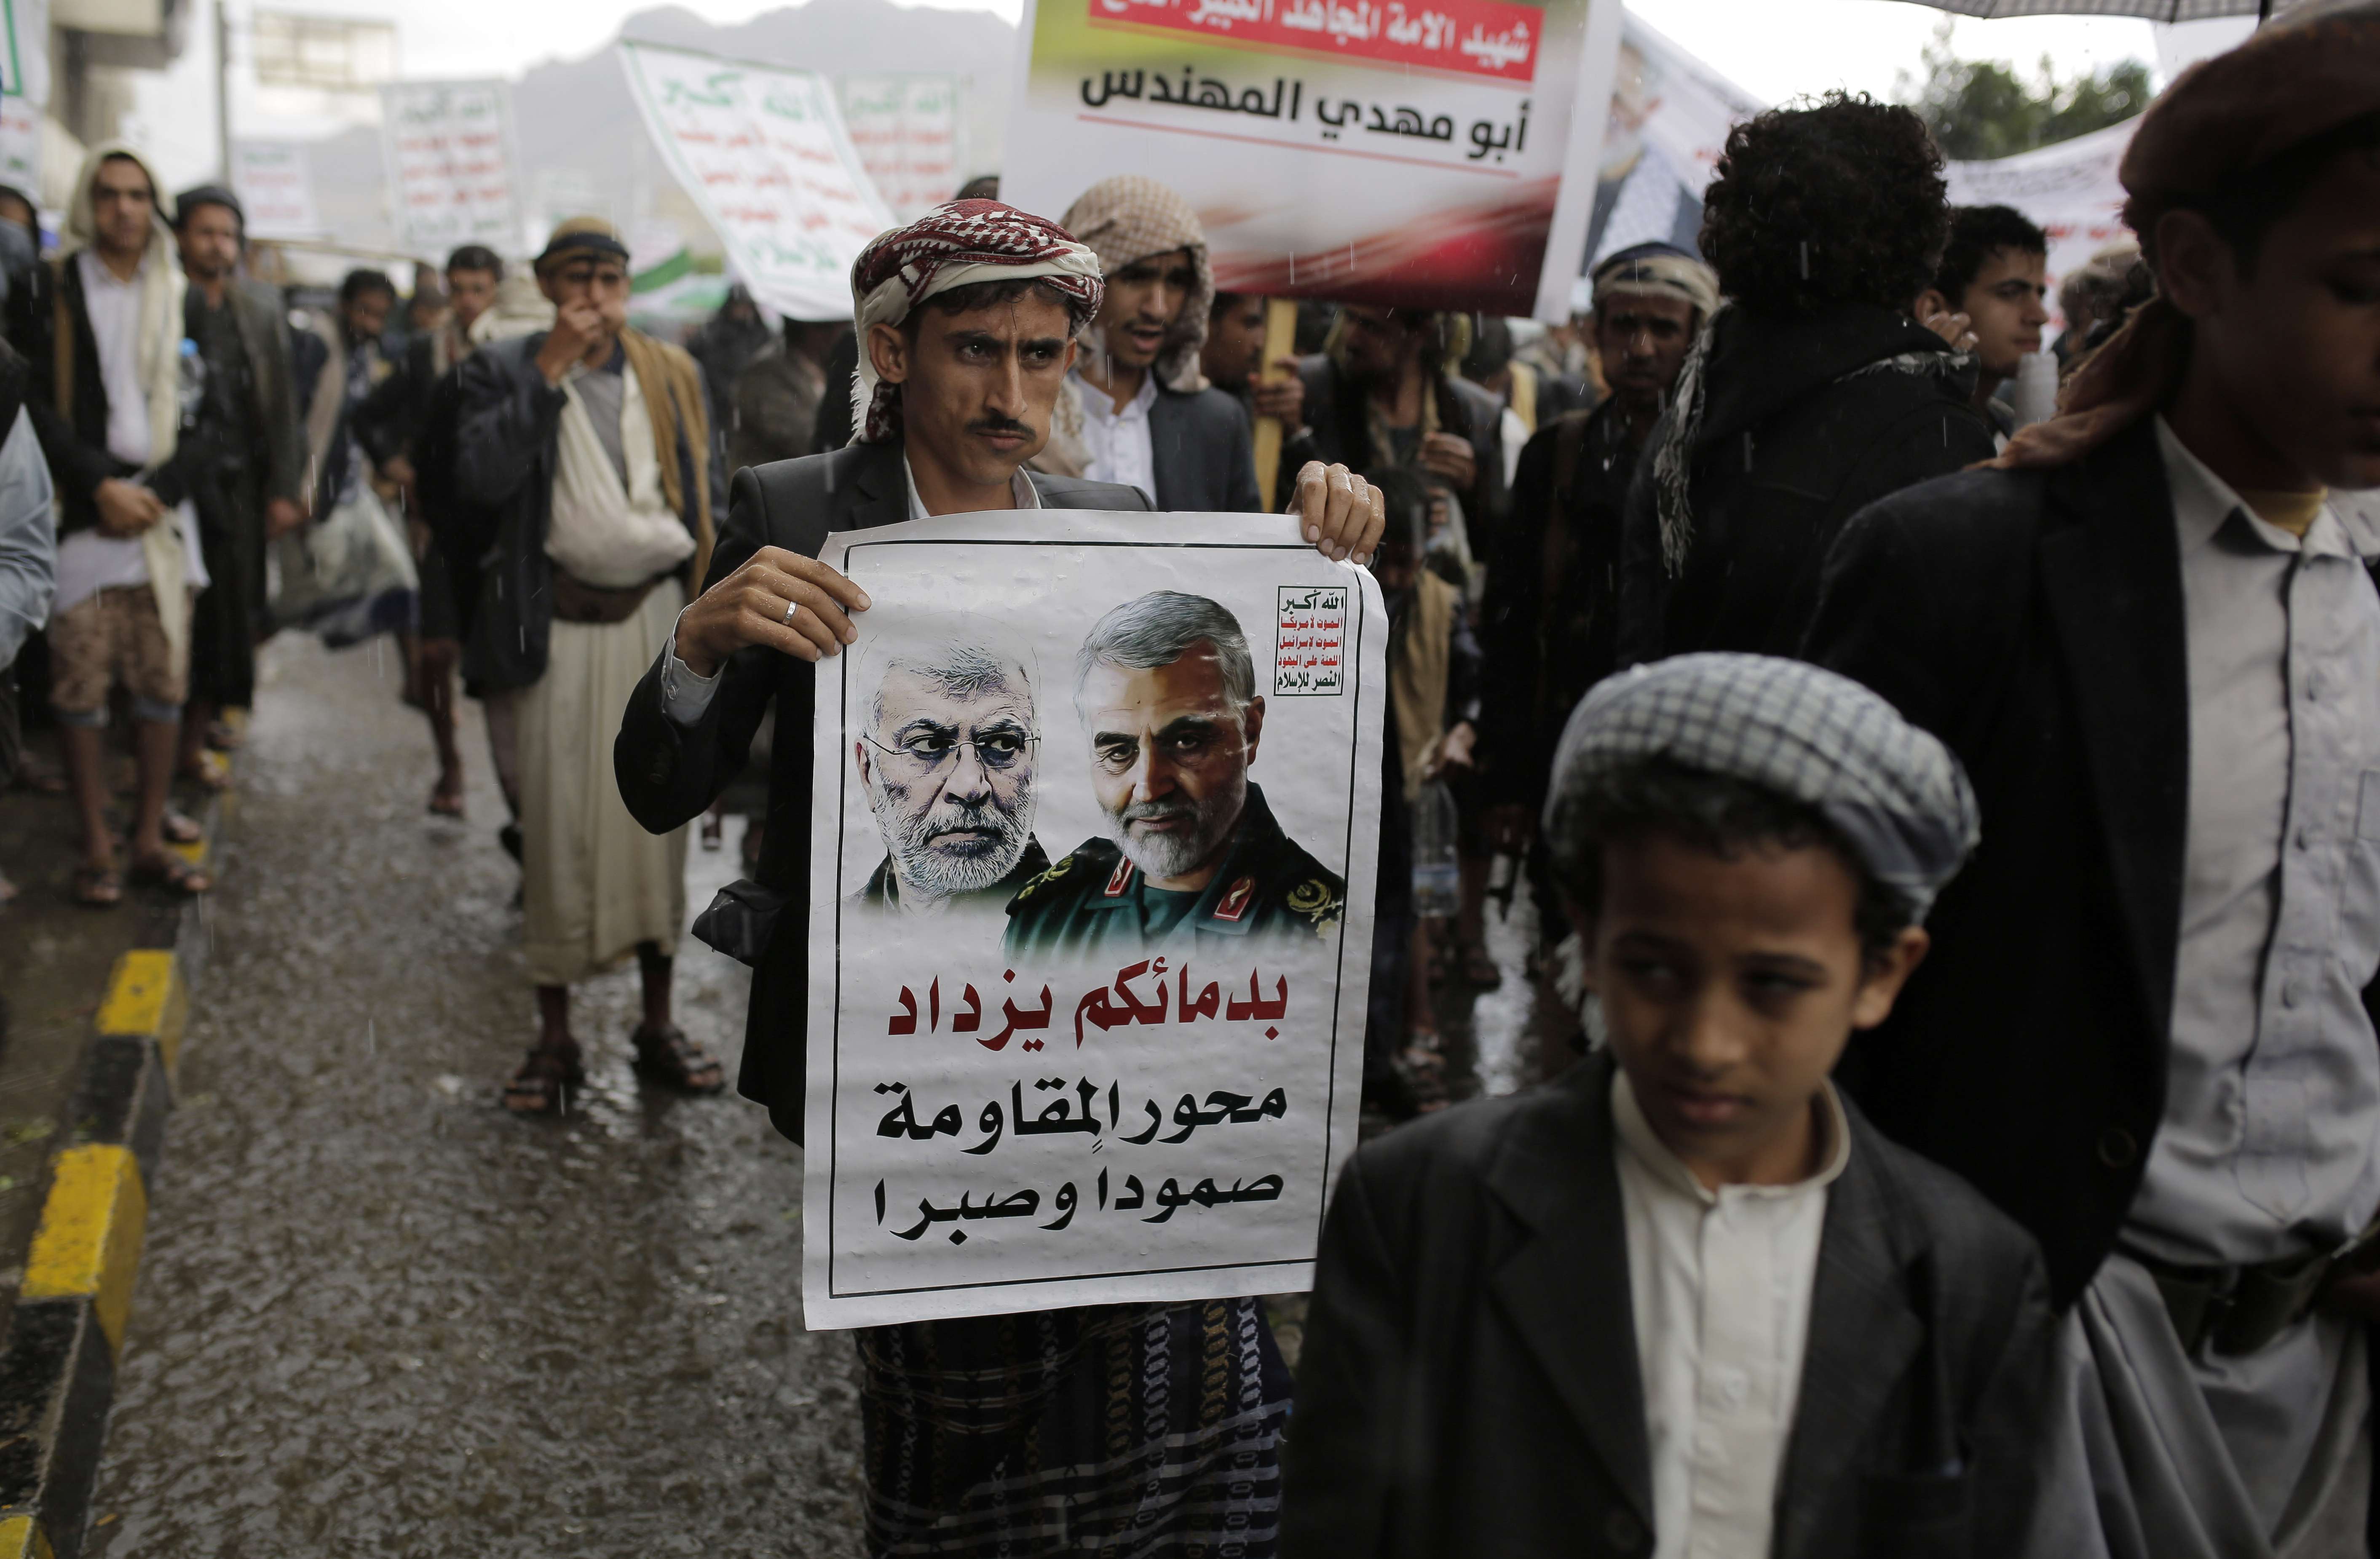 A Yemeni Shiite Houthi holds a poster of Iraqi militia commander Abu Mahdi al-Muhandis, left, and Iranian military commander Qassem Soleimani during a protest against a U.S. airstrike in Iraq that killed both commanders, in Sanaa, Yemen, Monday, Jan. 6, 2020. (AP Photo/Hani Mohammed)